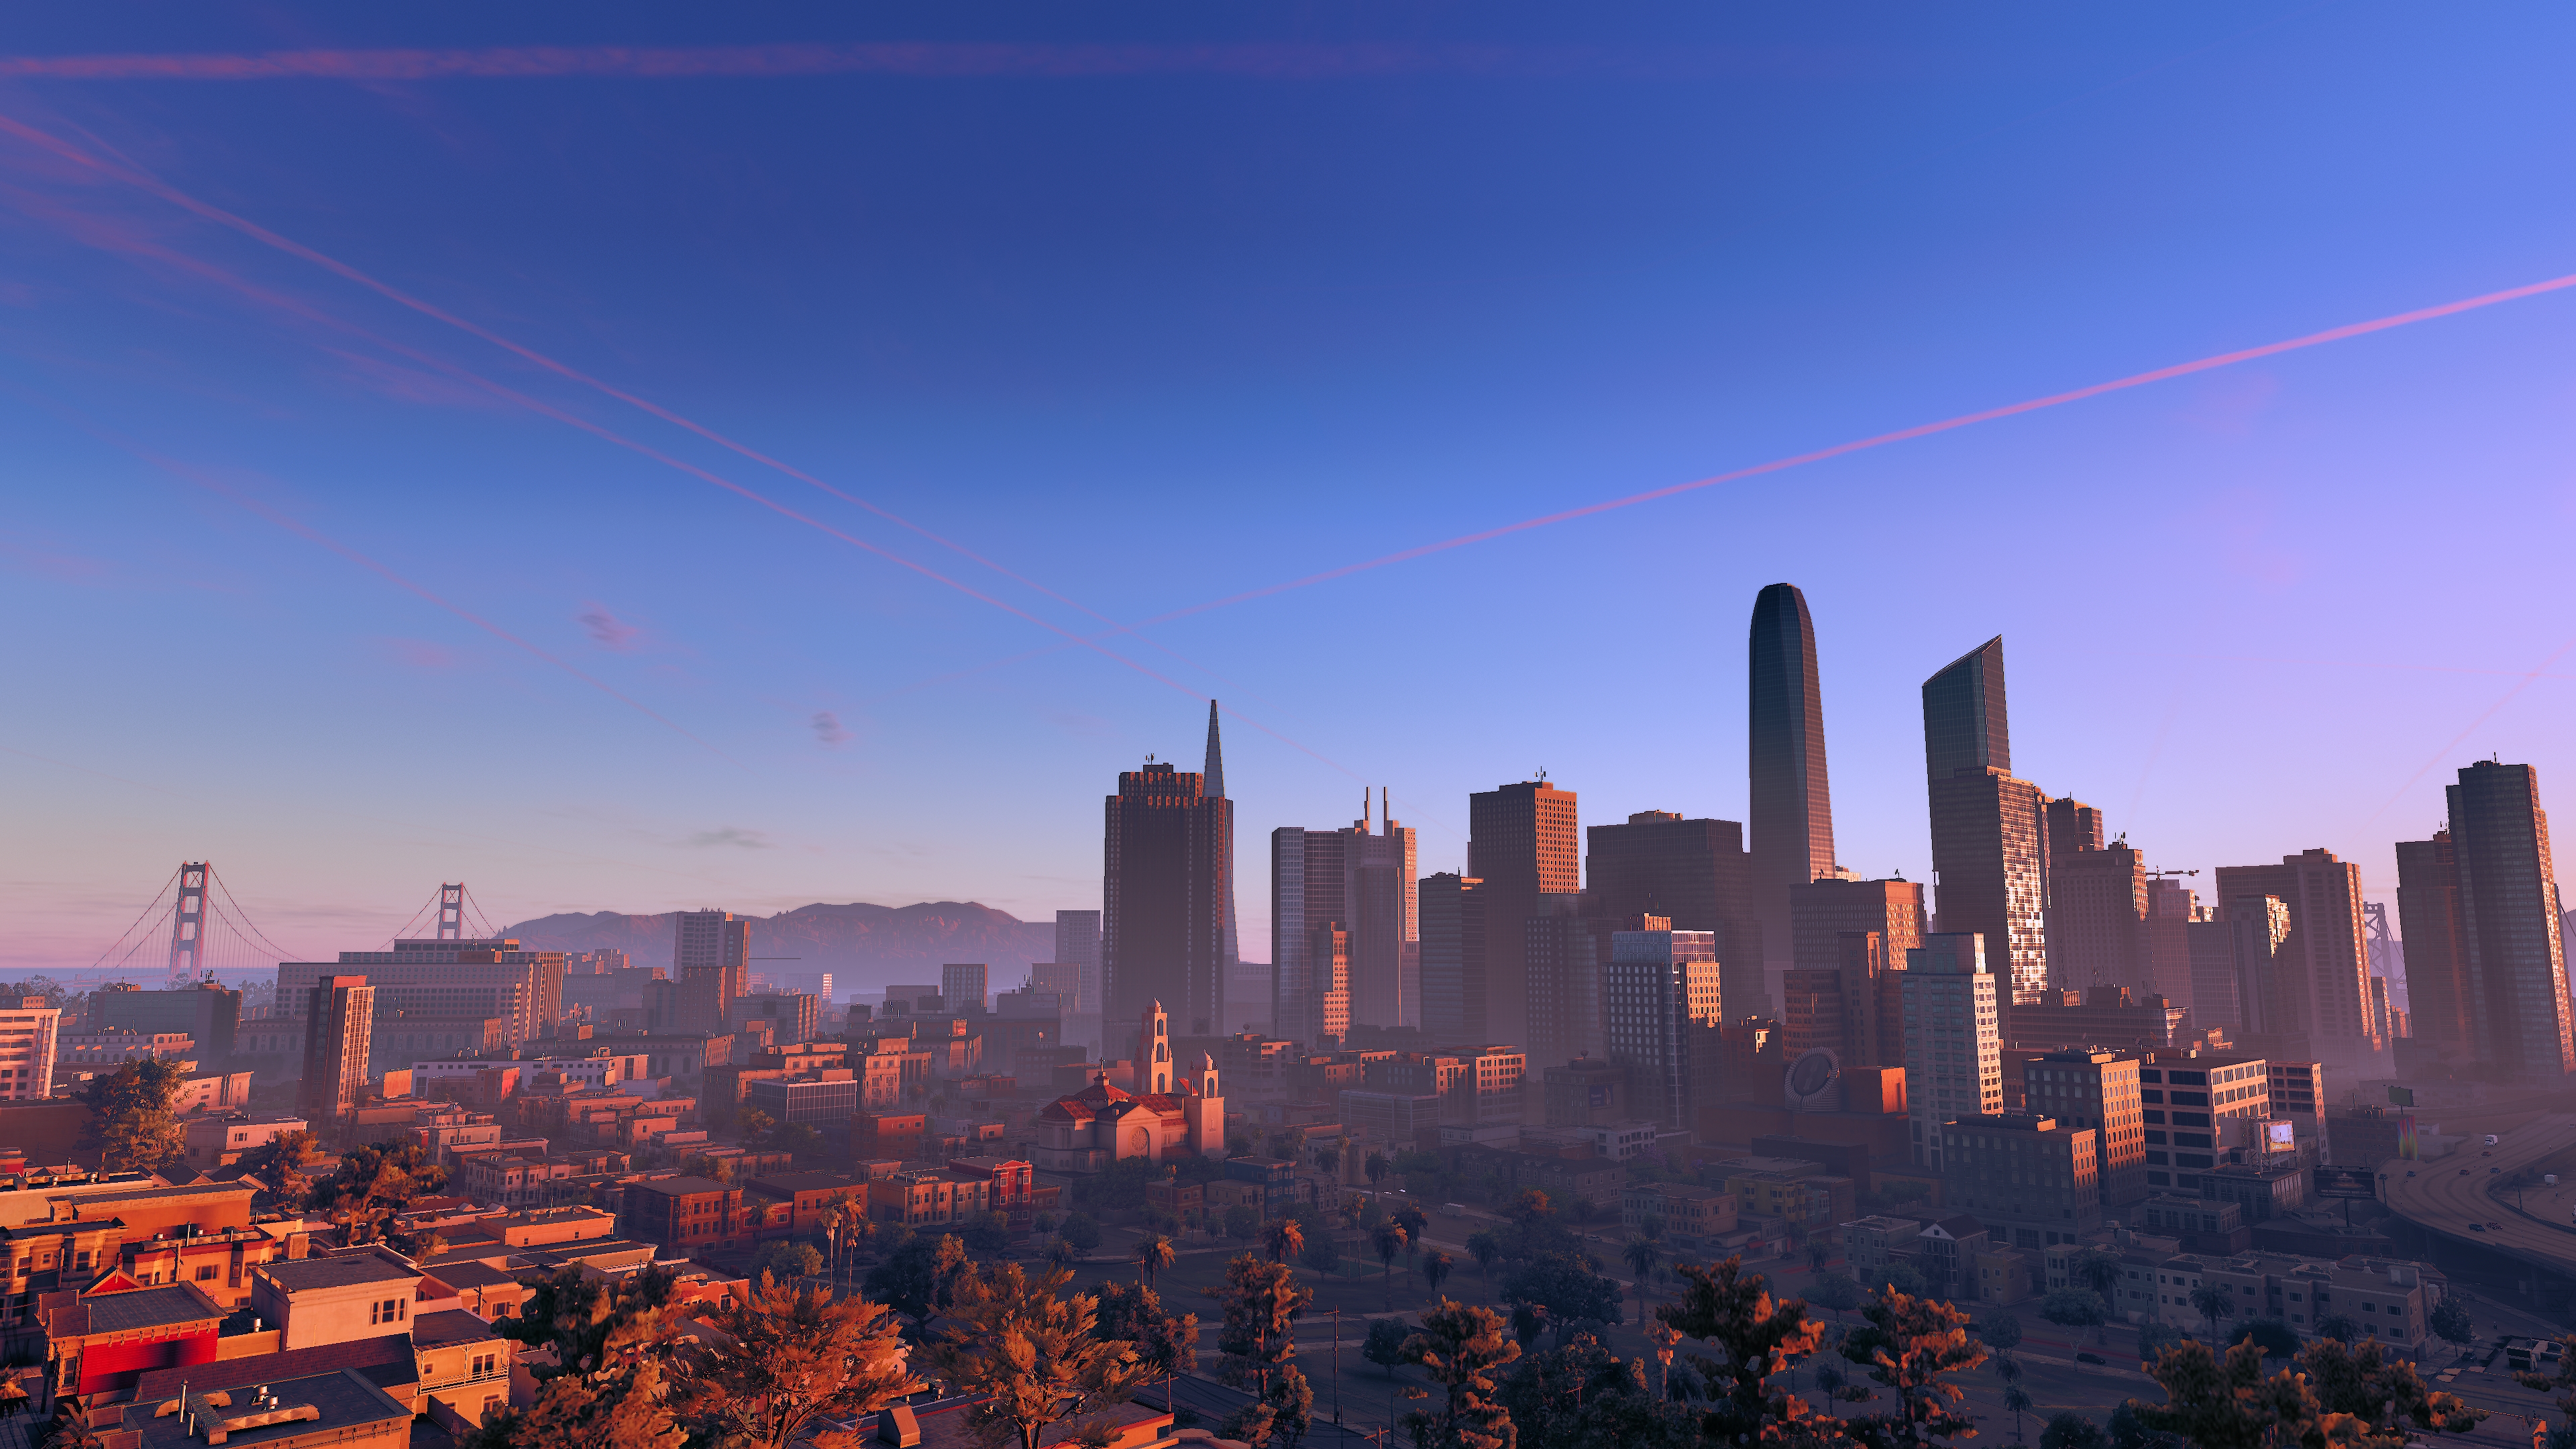 General 3840x2160 city landscape San Francisco building structure morning sky trees screen shot